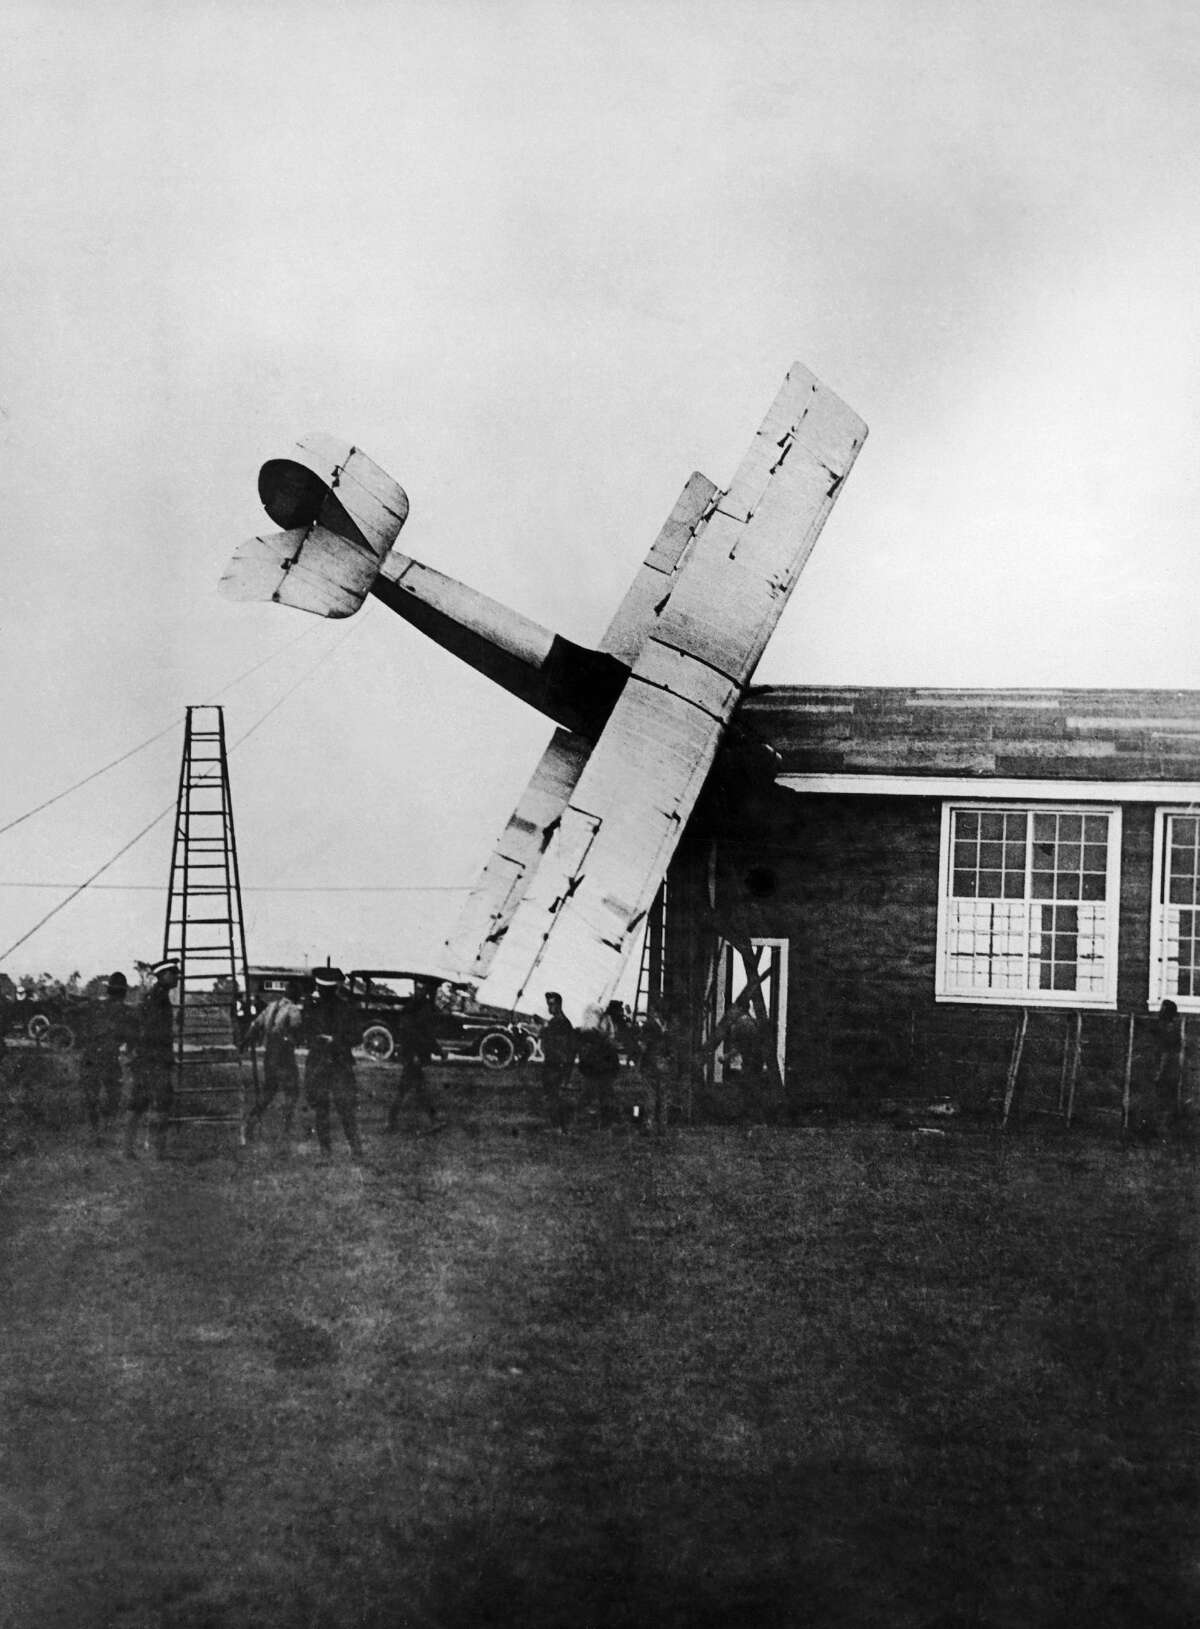 A photographer captures an airplane crash on May 4, 1919, in Texas.